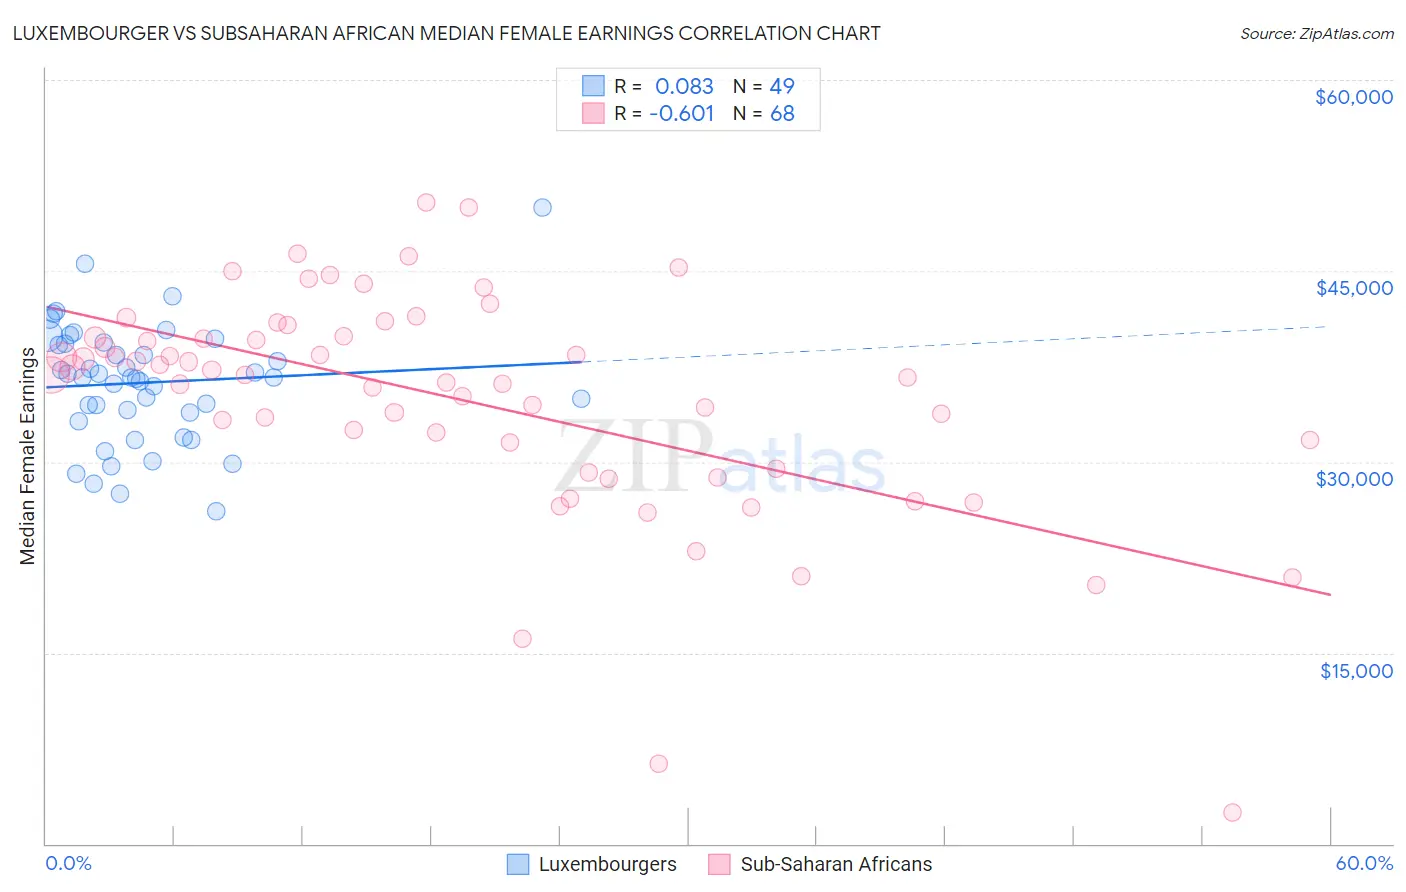 Luxembourger vs Subsaharan African Median Female Earnings